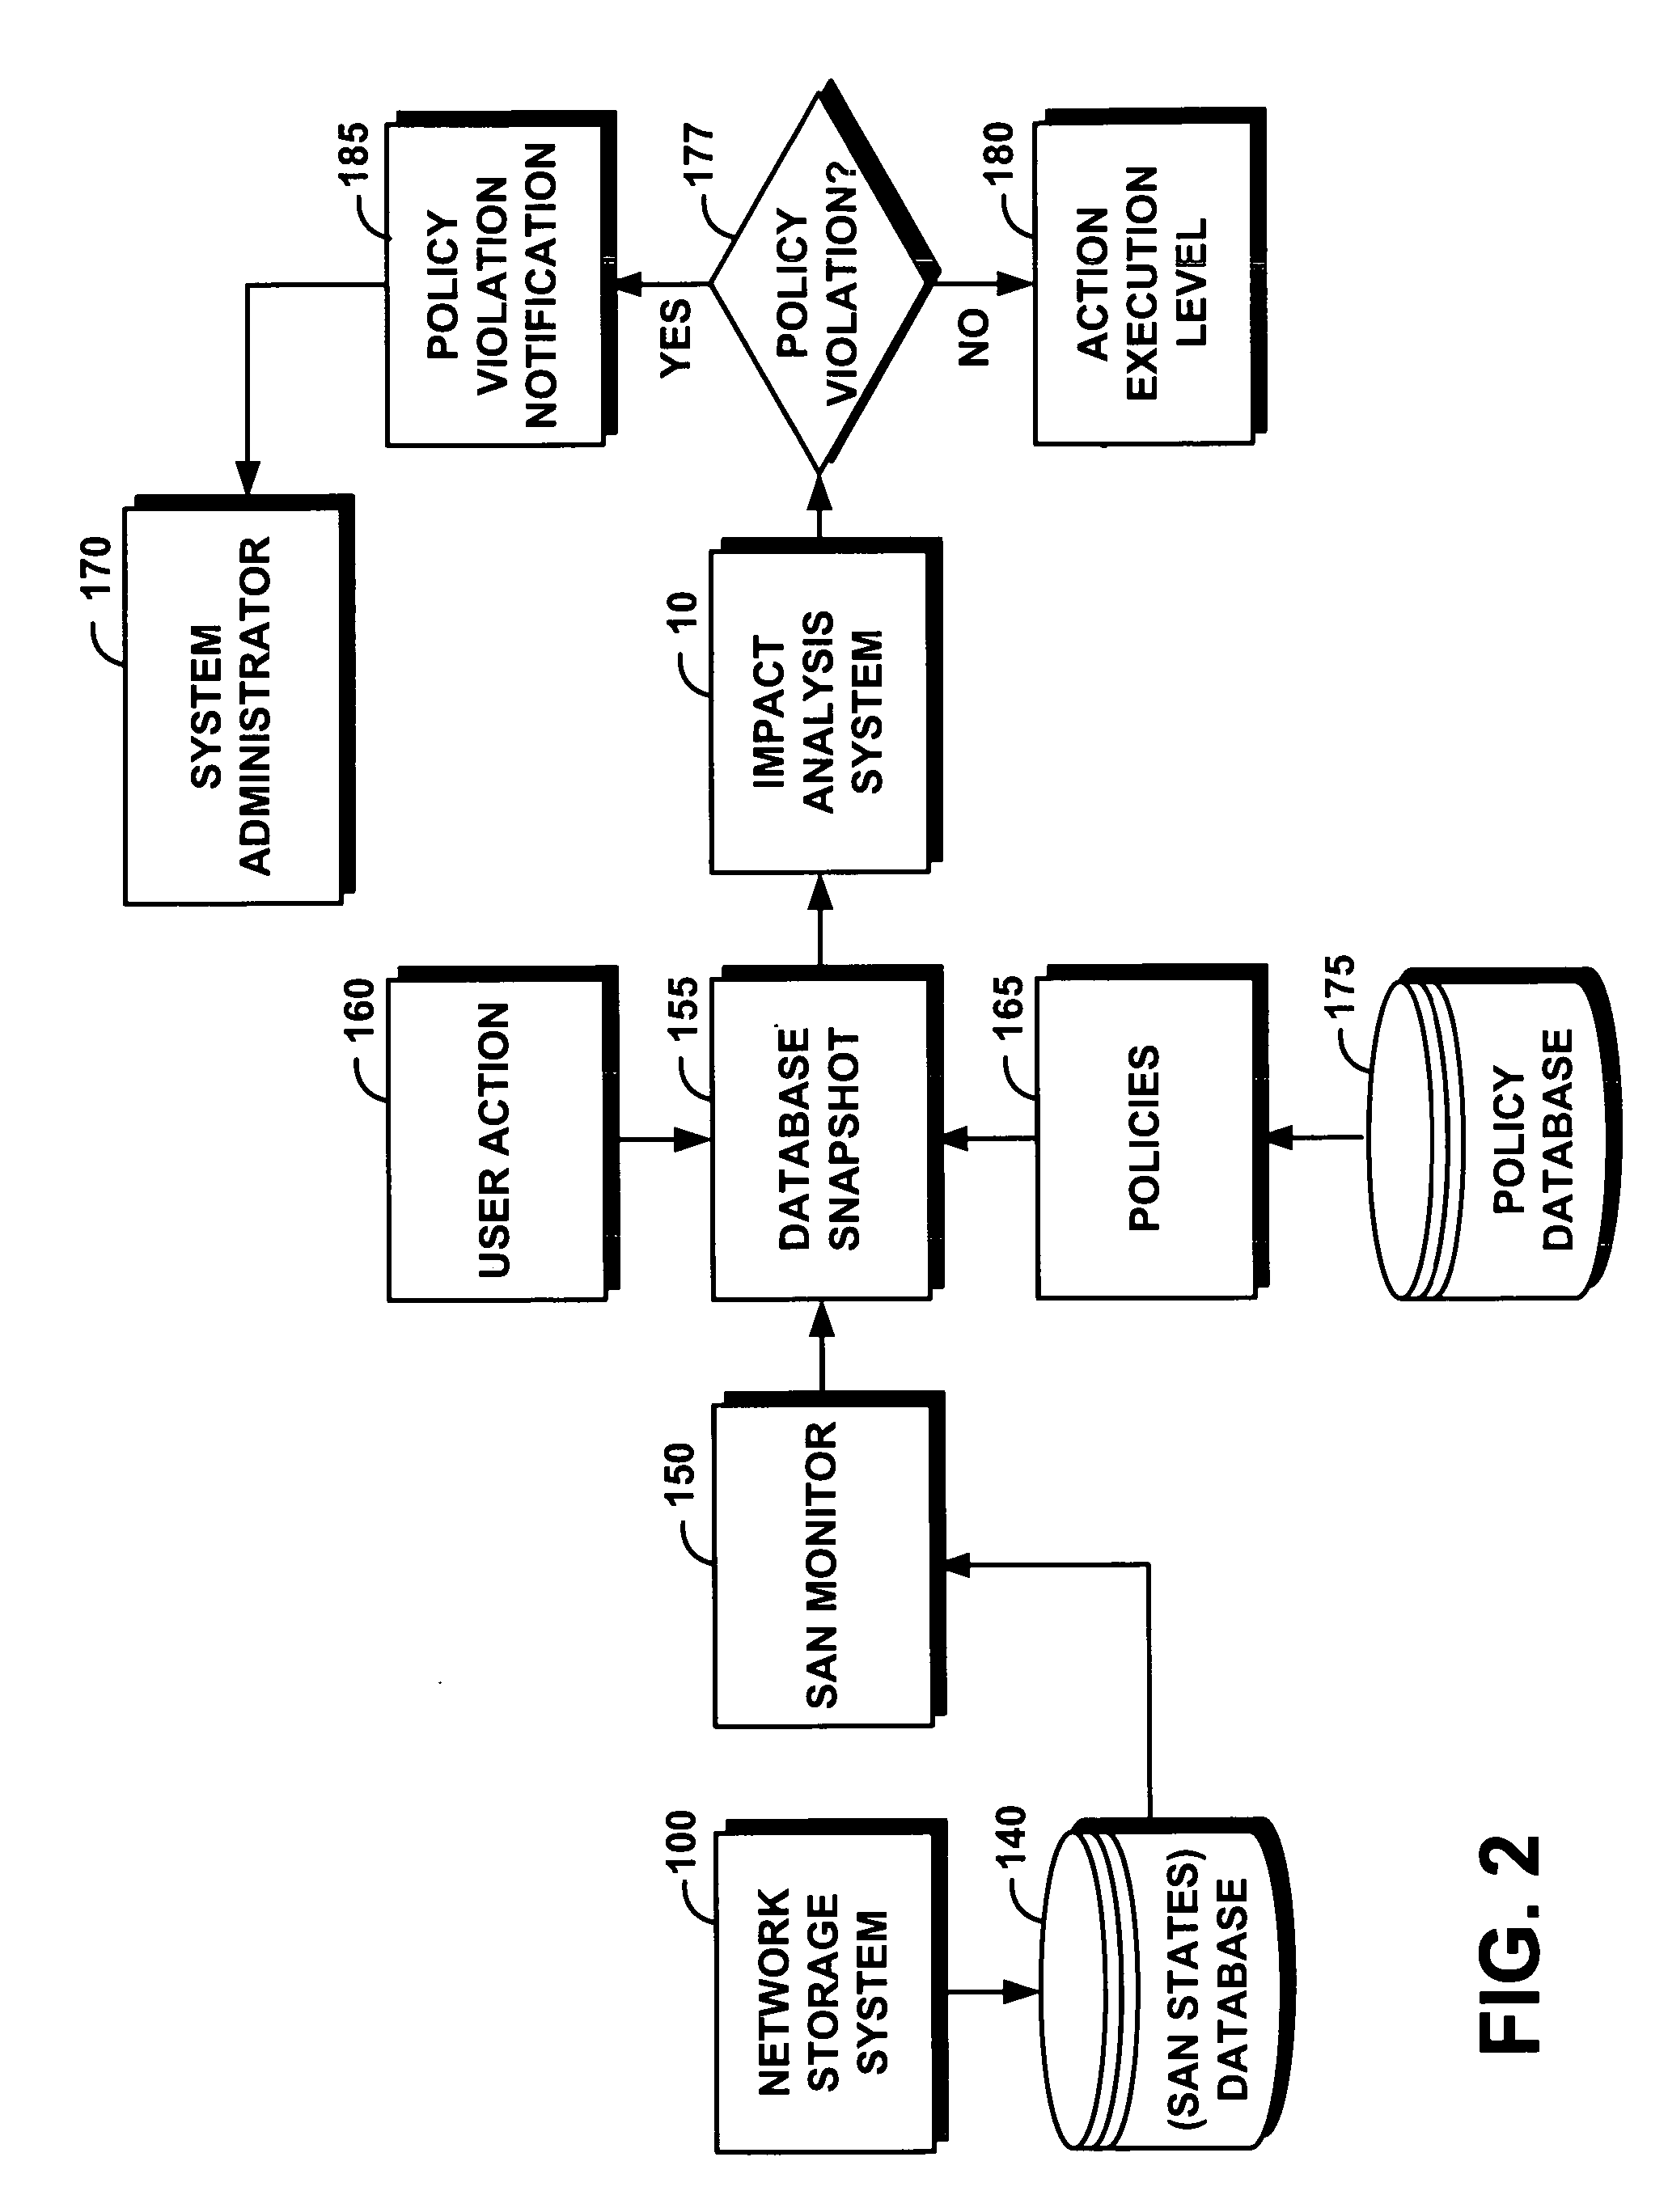 System and method for proactive impact analysis of policy-based storage systems